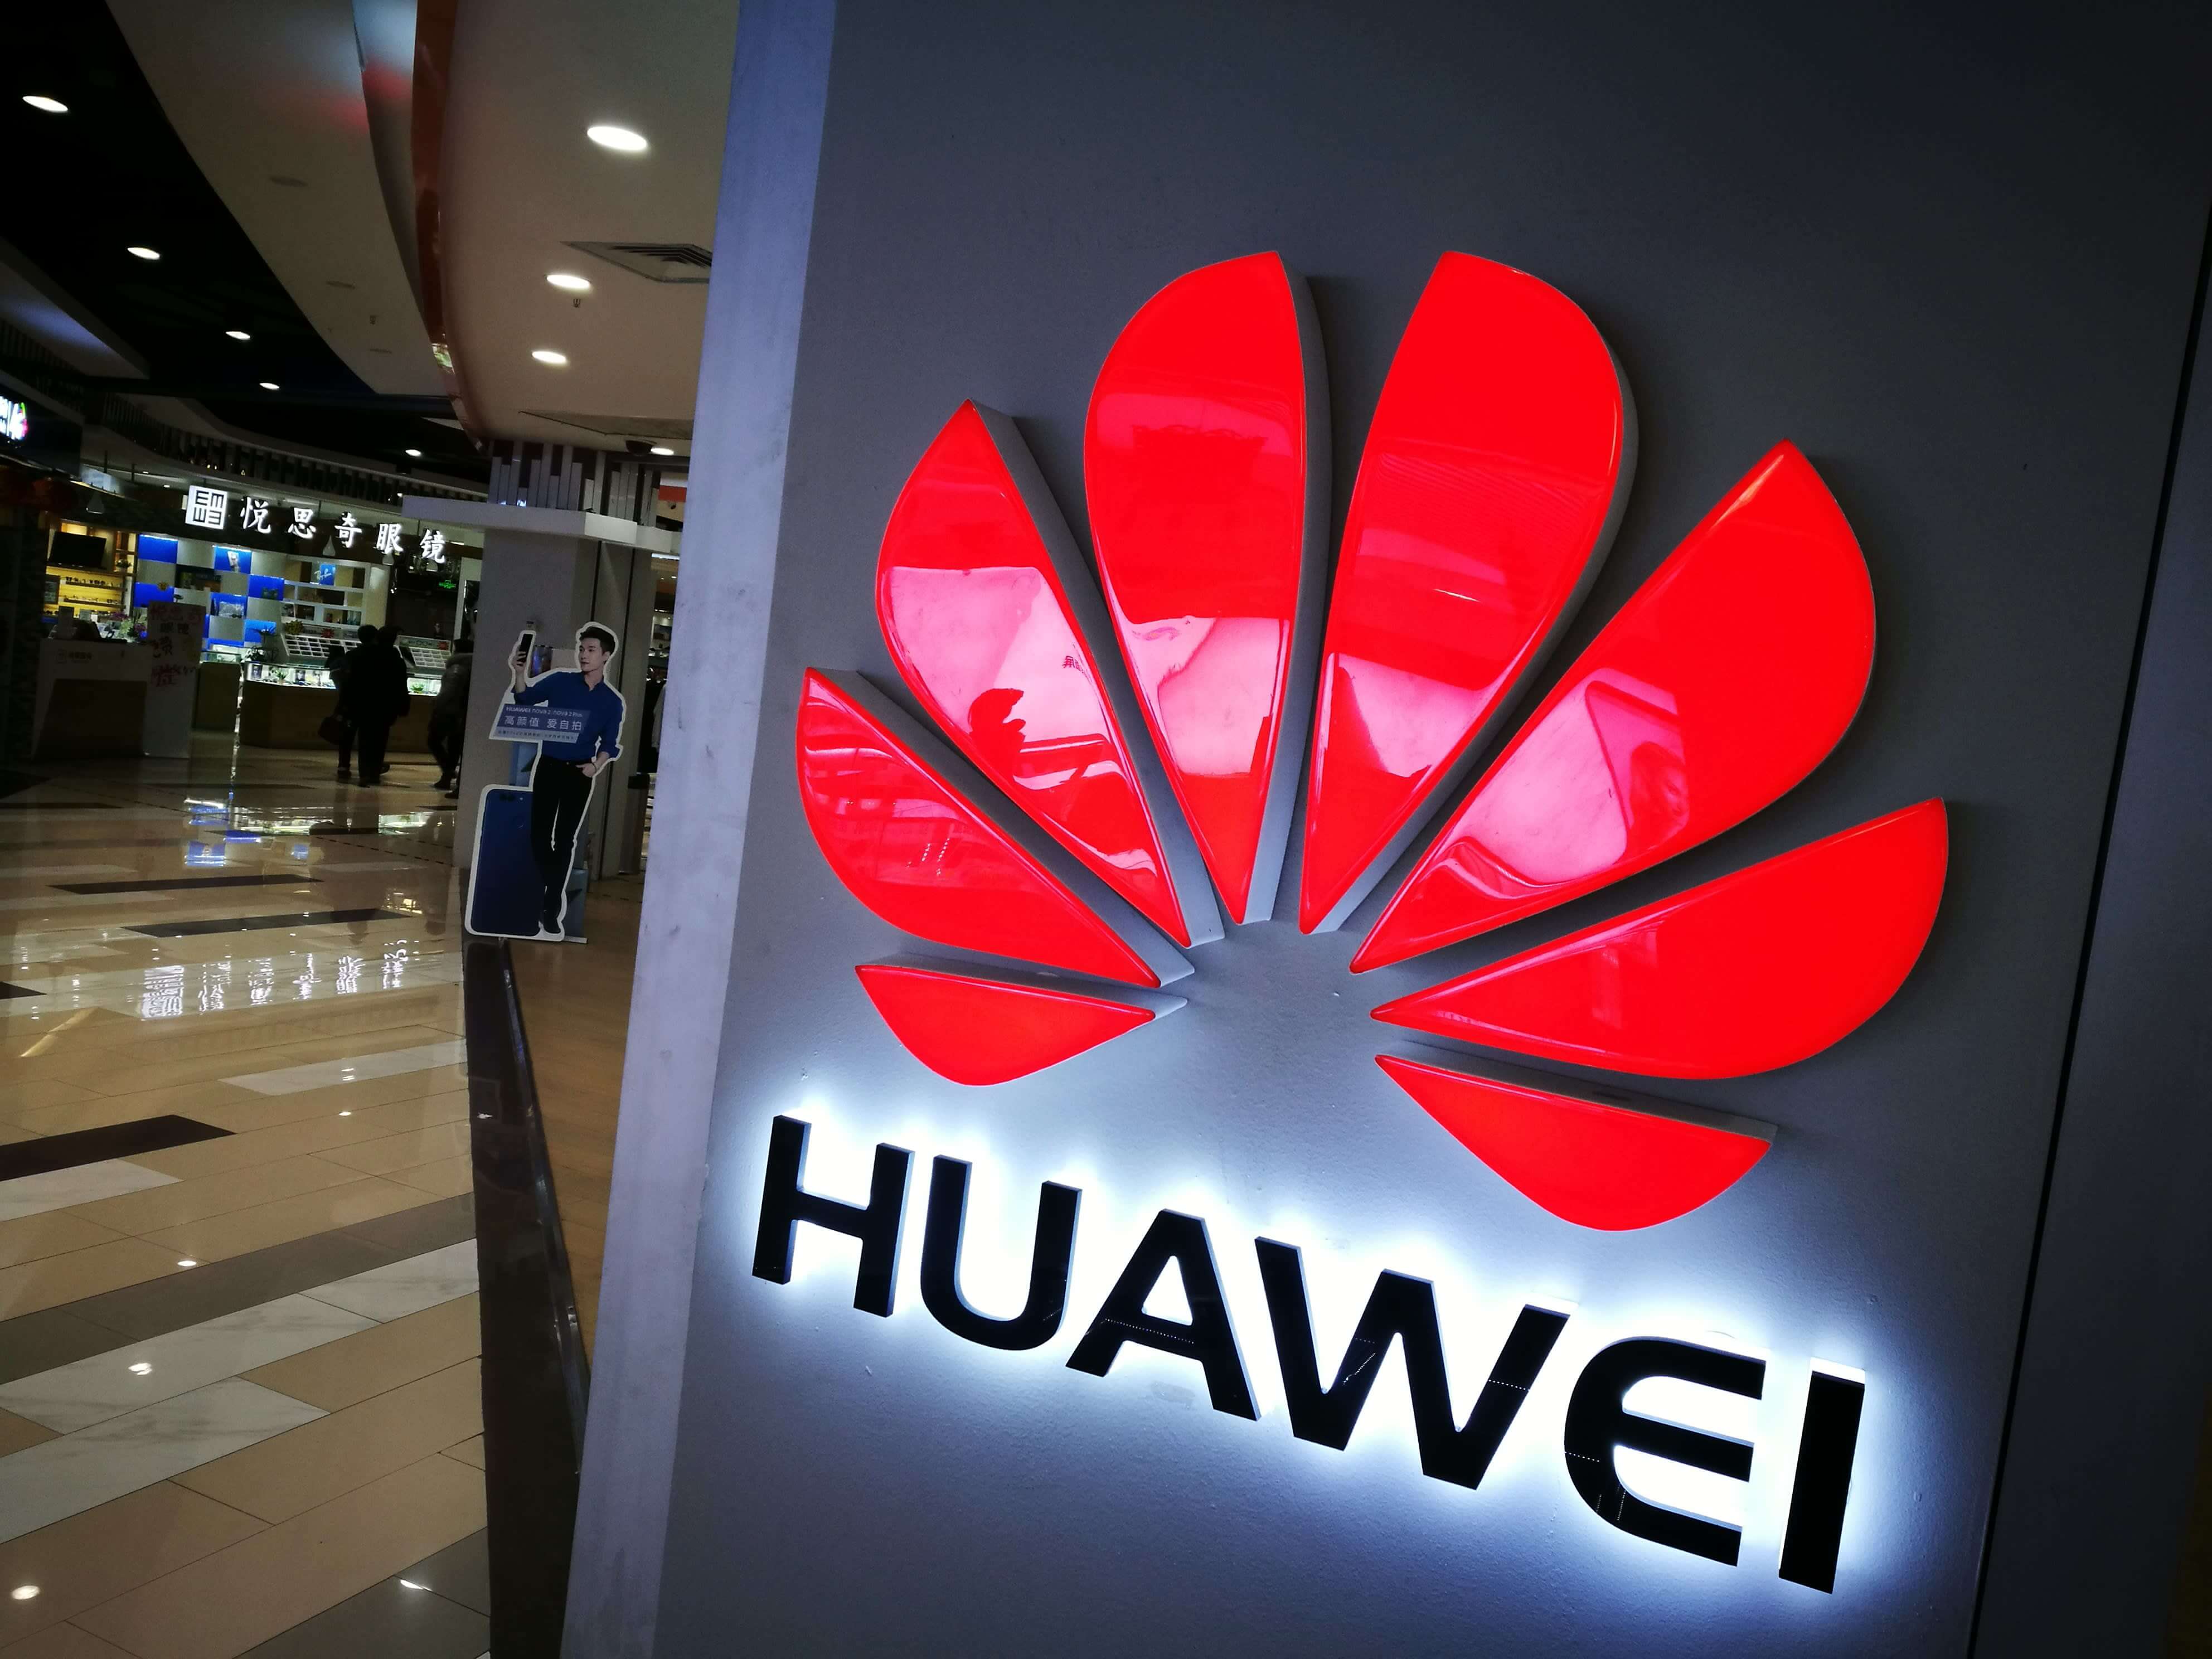 US ban bites into Huawei's profits as company warns of potential Chinese retaliation